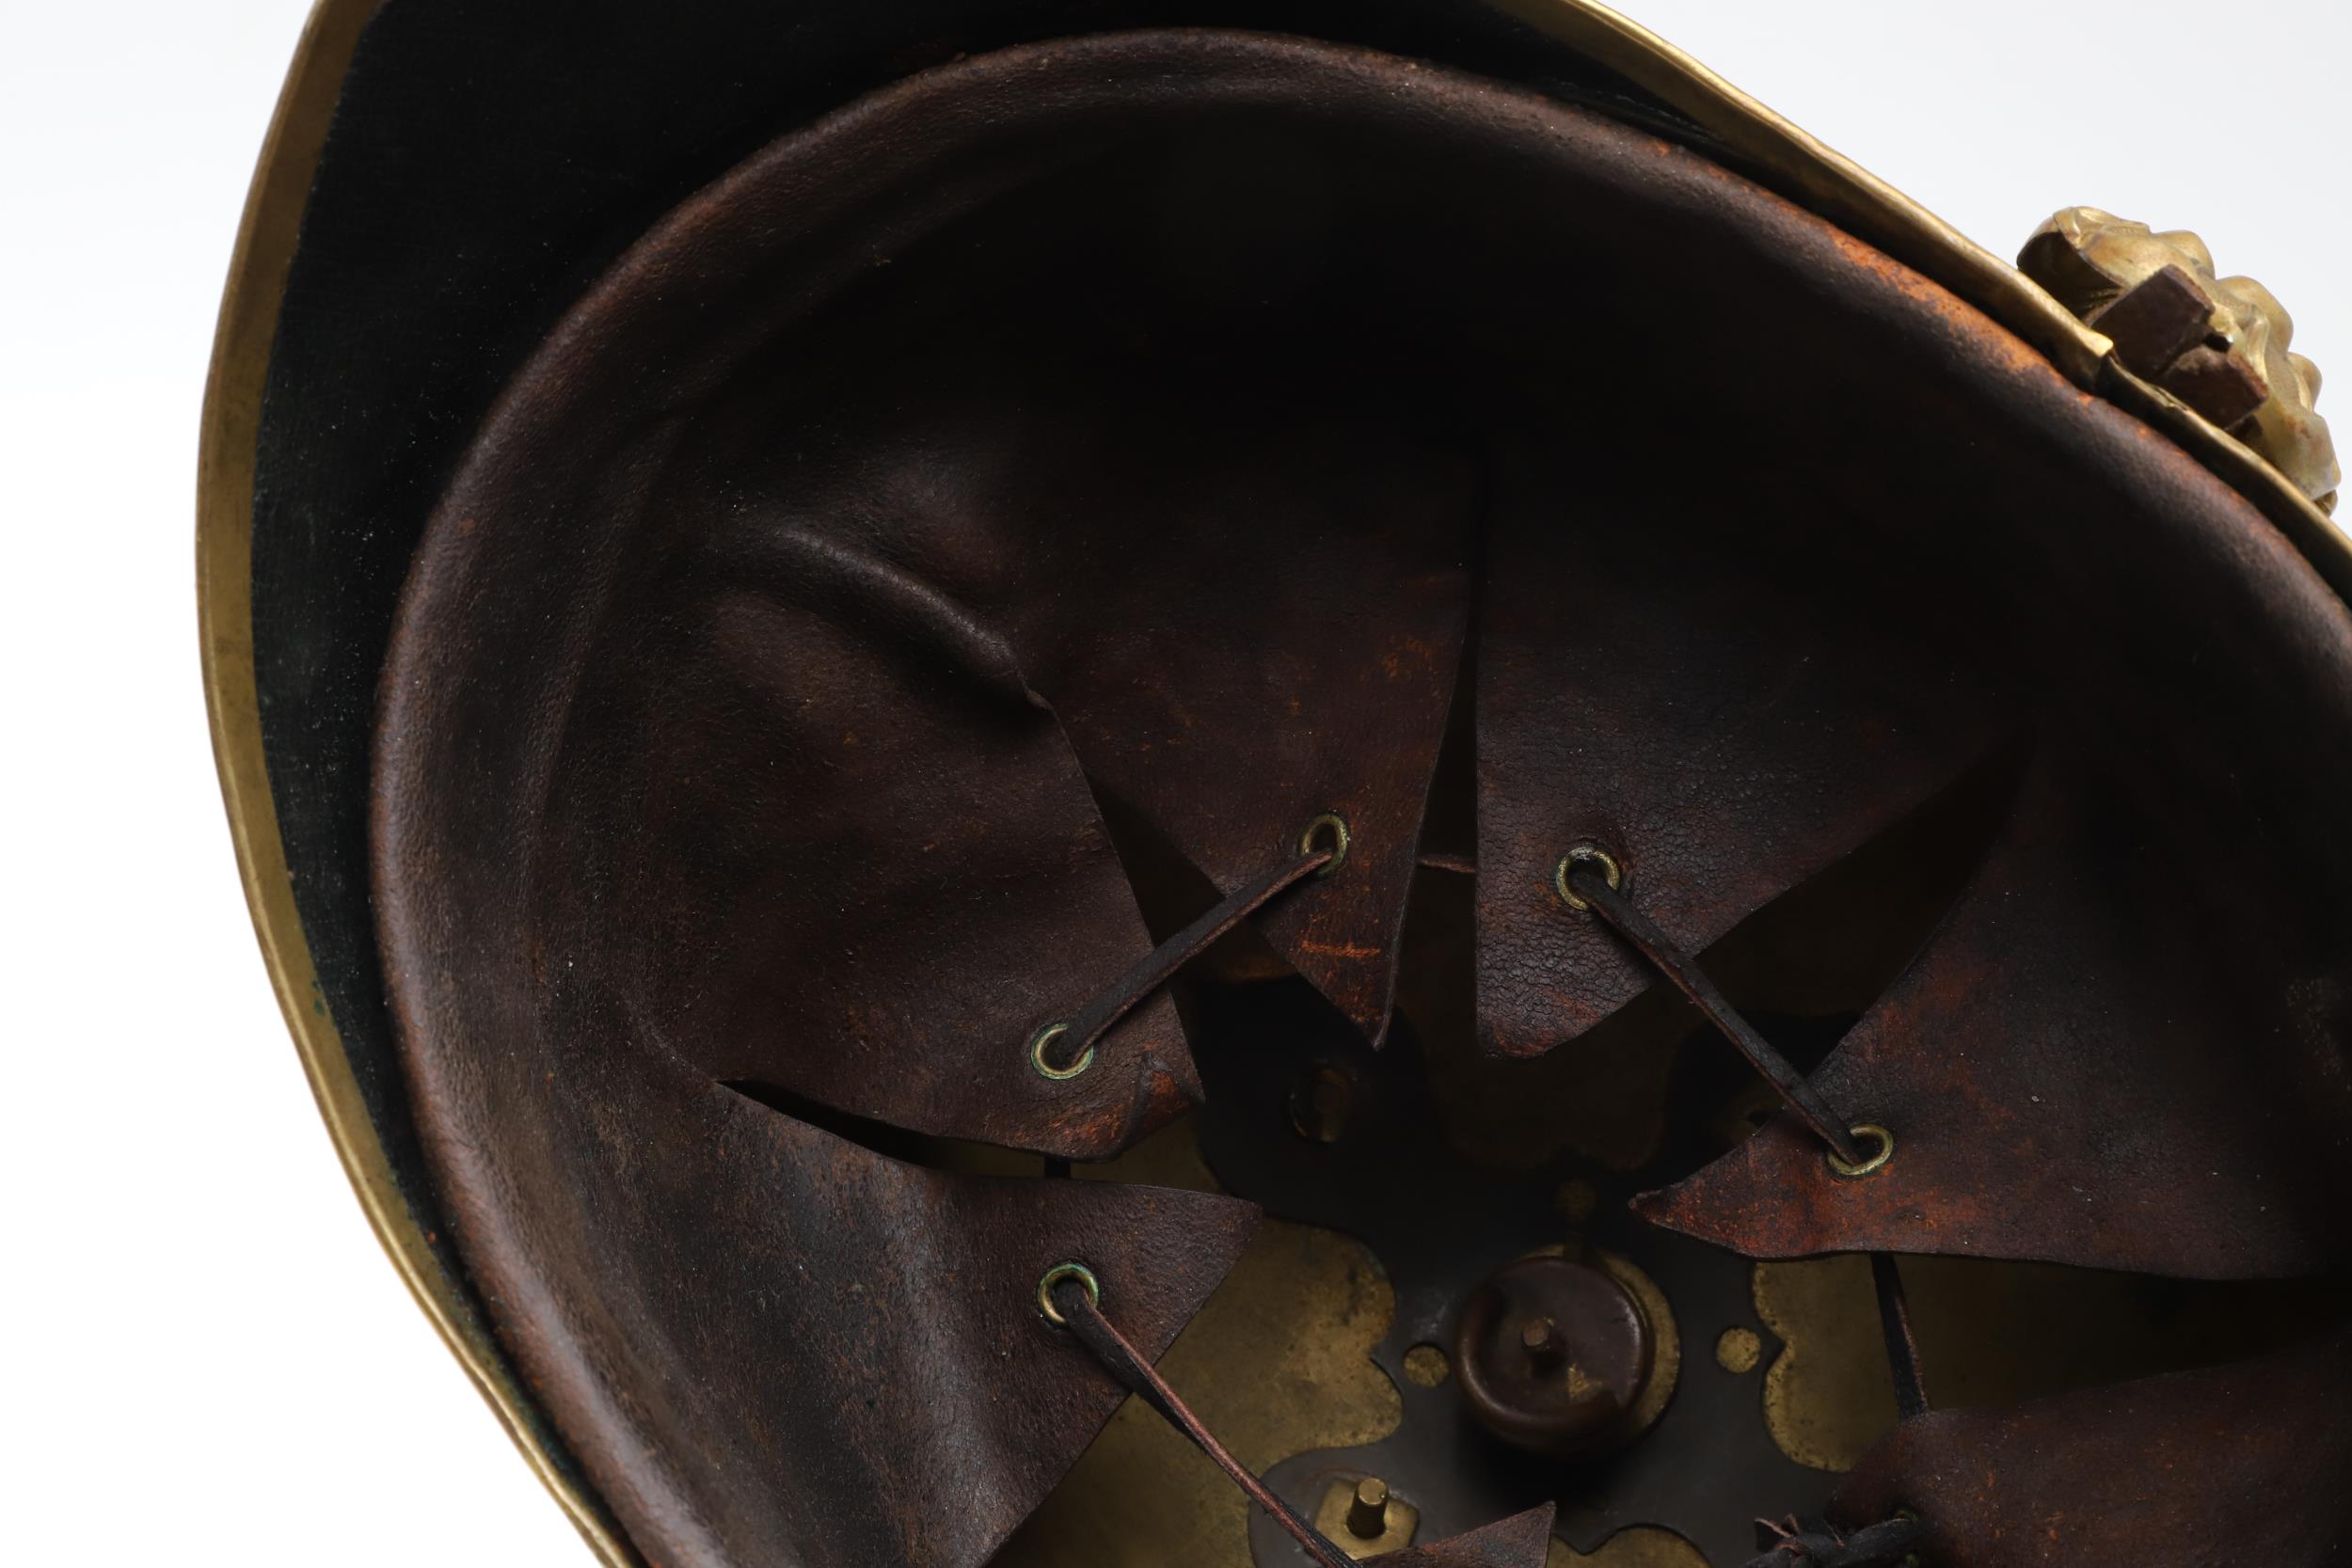 A 5TH DRAGOON GUARDS 1871 PATTERN HELMET. - Image 14 of 15